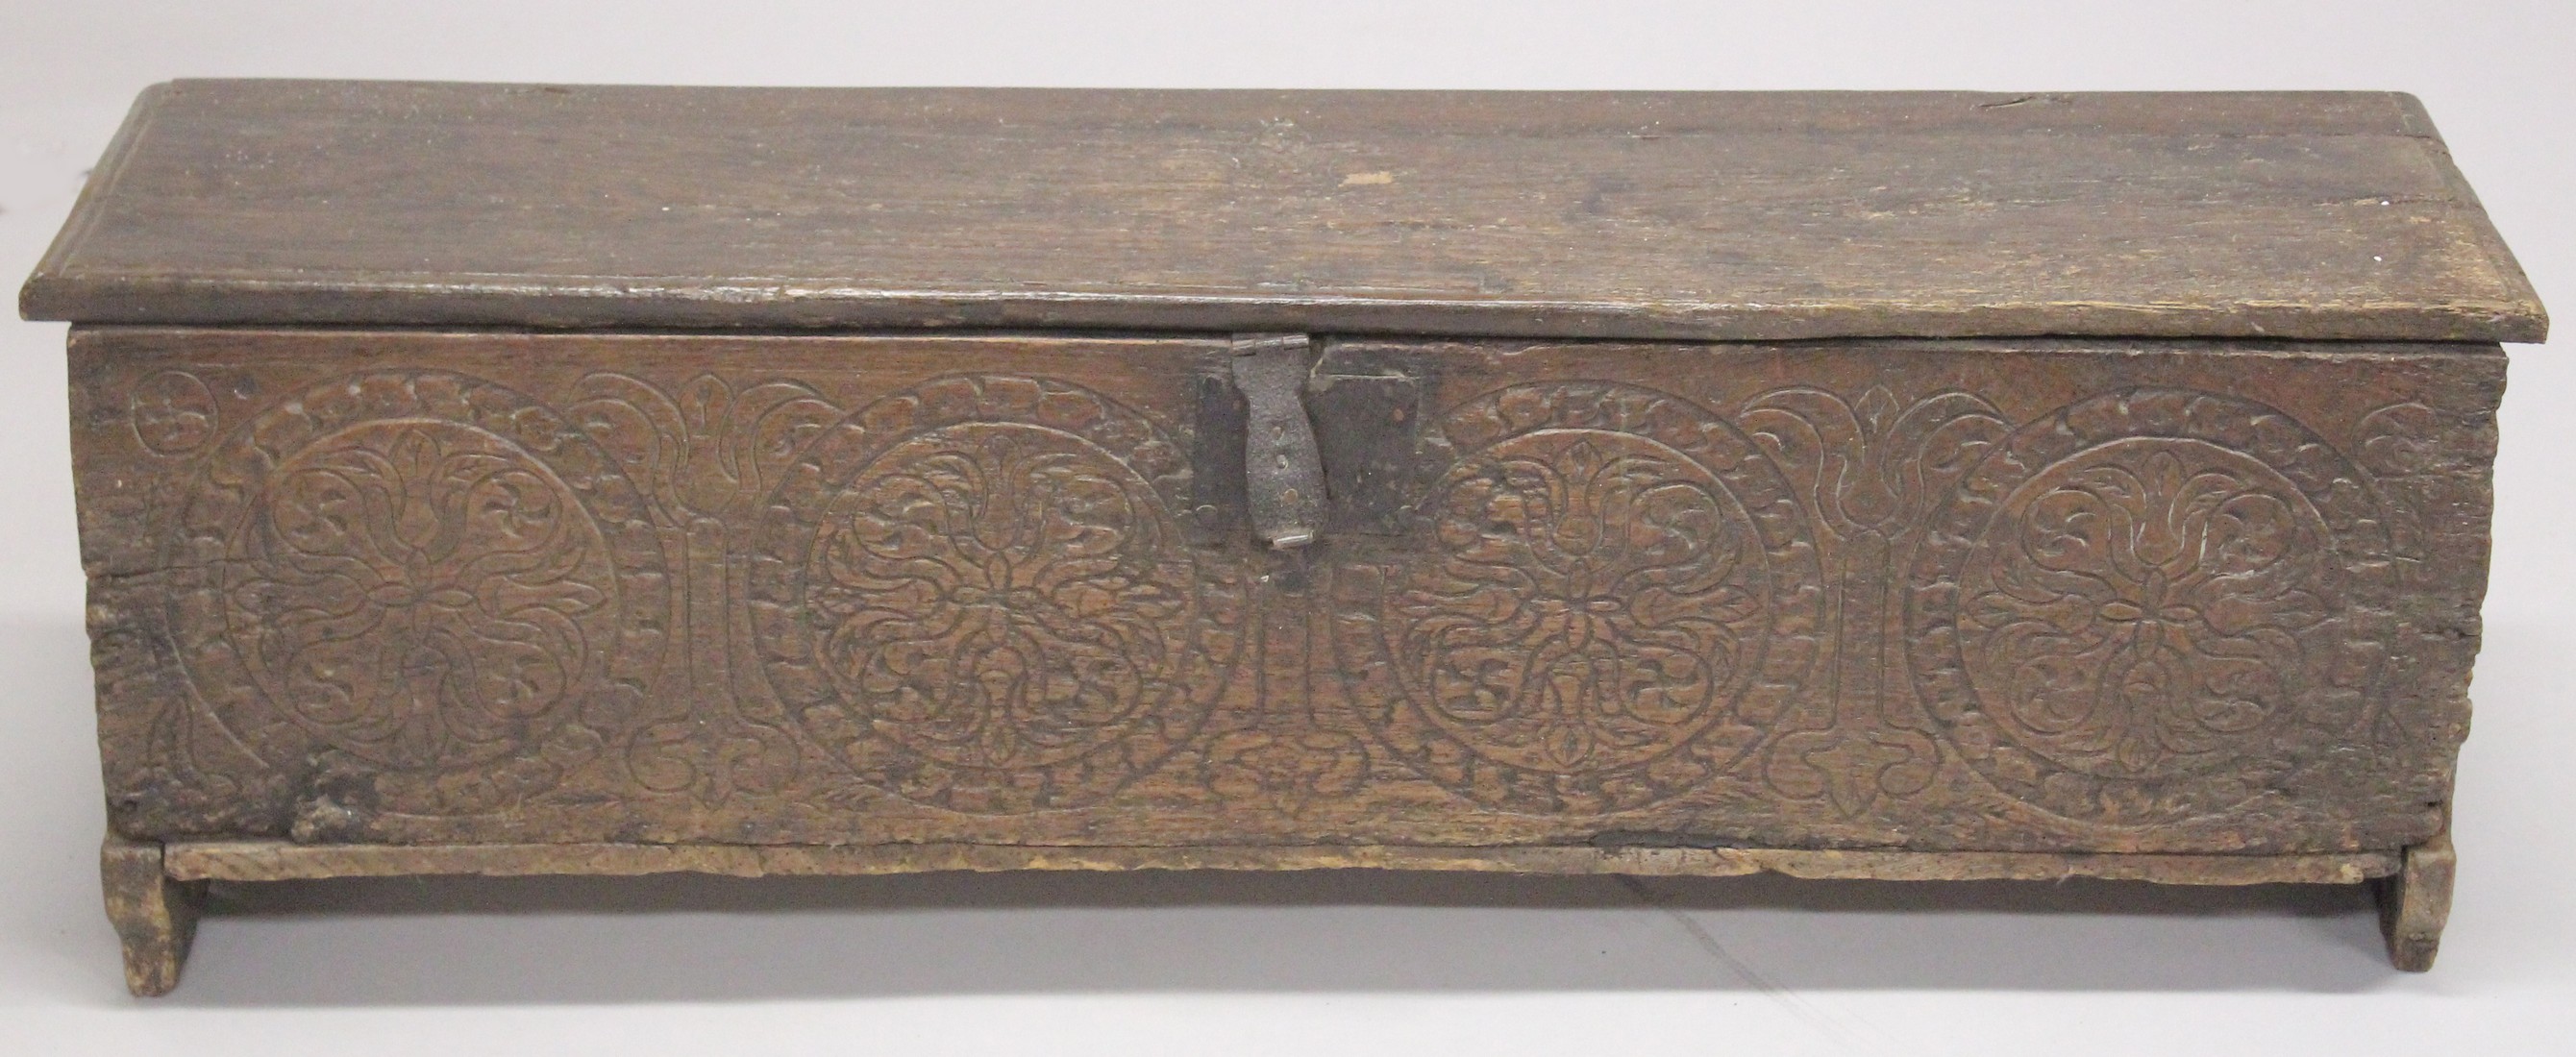 A VERY EARLY POSSIBLY 16TH CENTURY OAK SWORD CHEST with plain plank top and sides. The front with